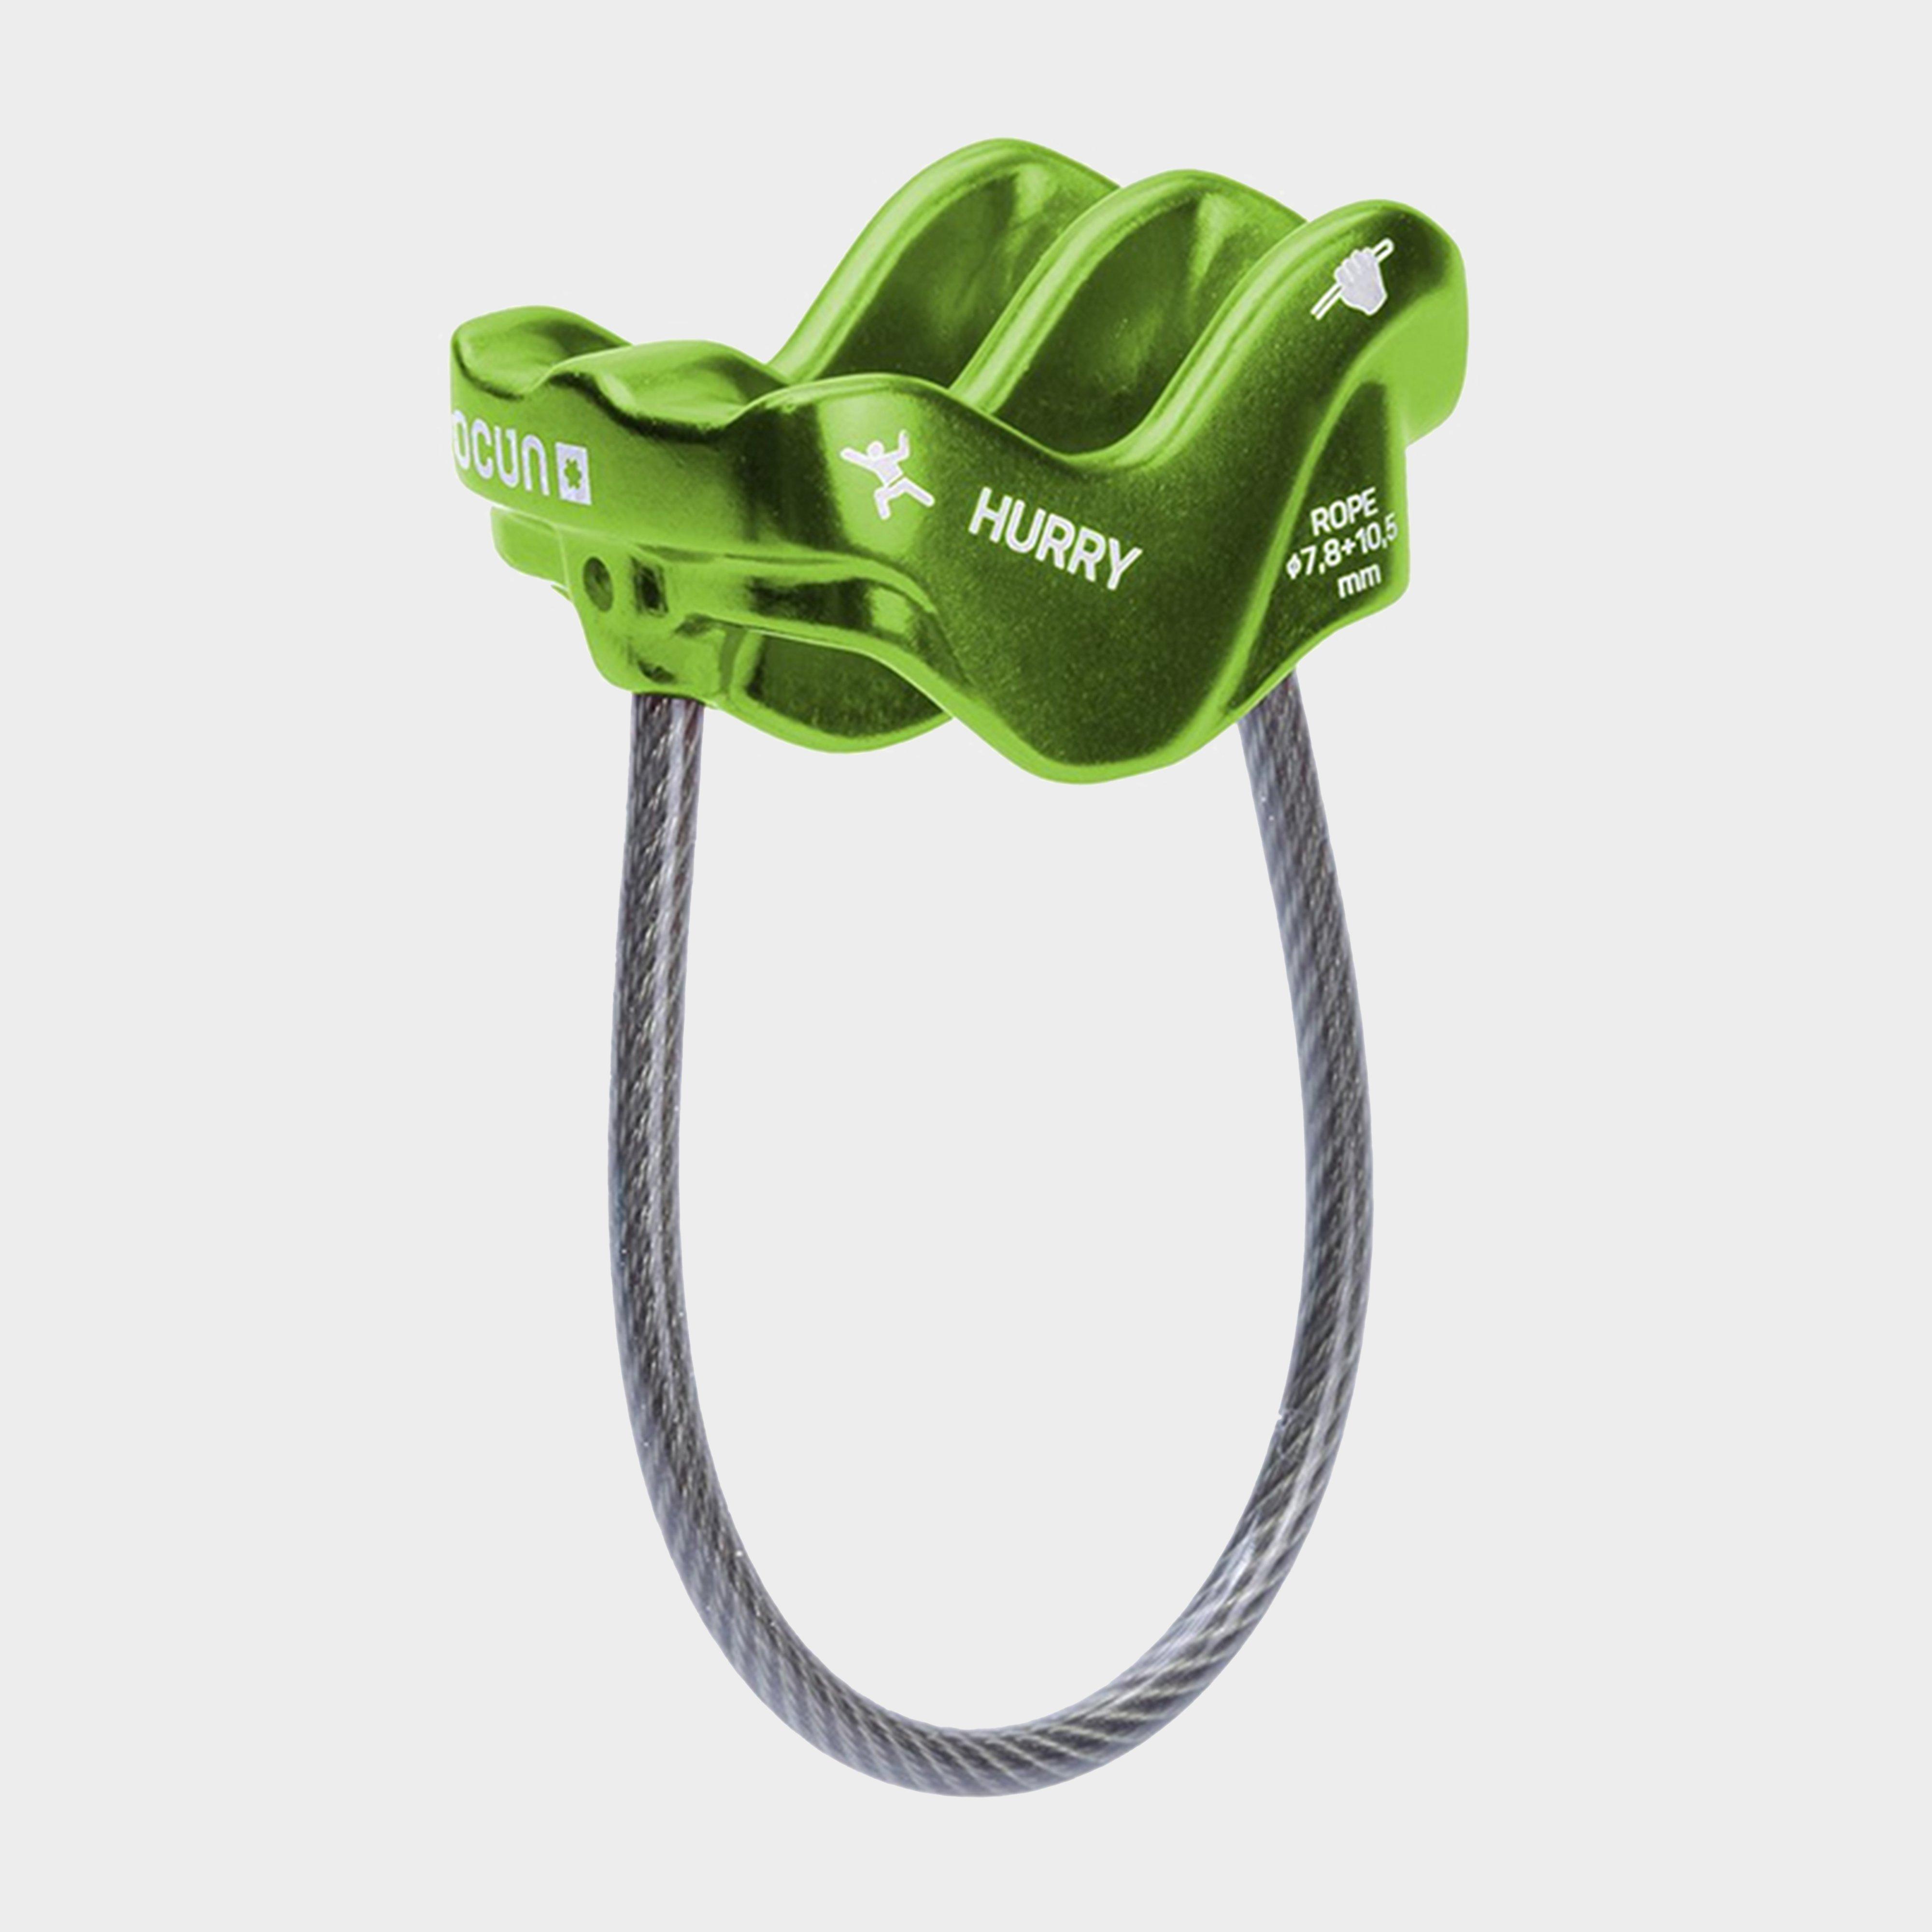 Image of Ocun Hurry Belay Device - Green, Green